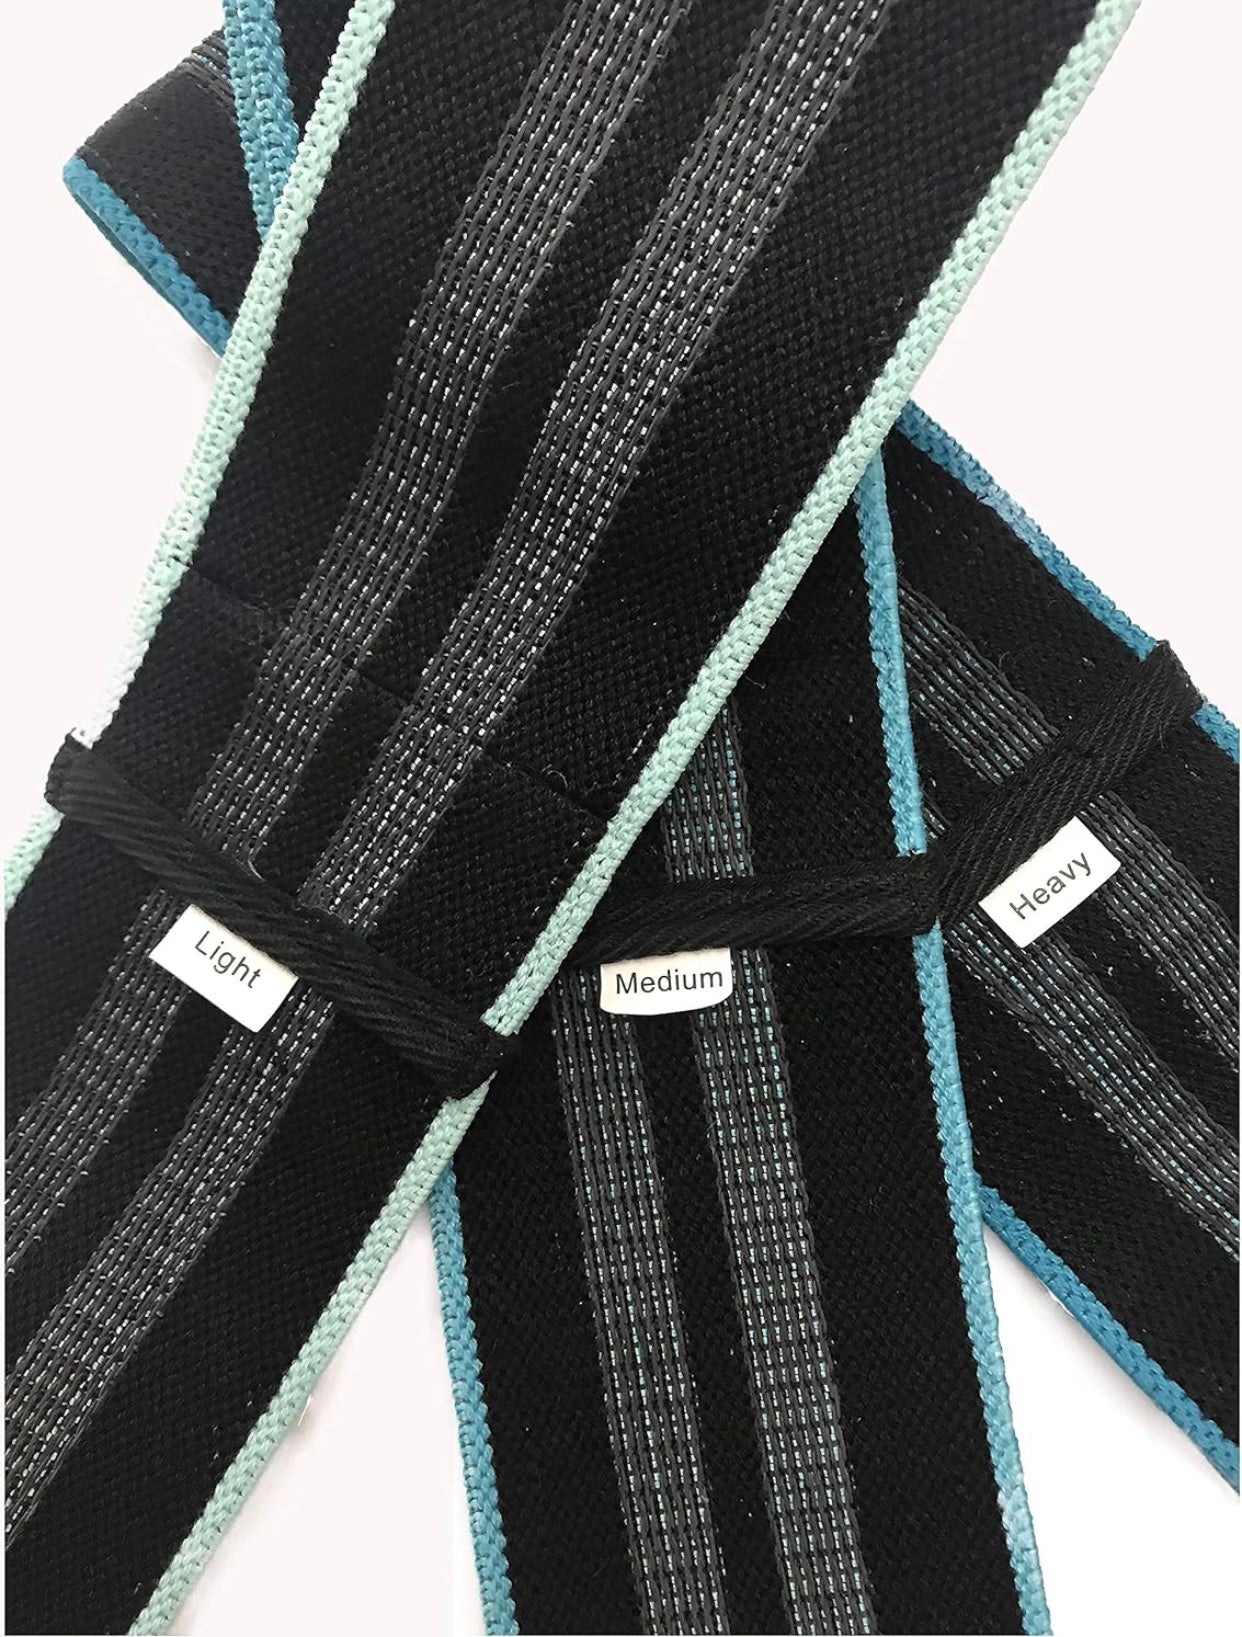 Fabric Hip Resistance Bands